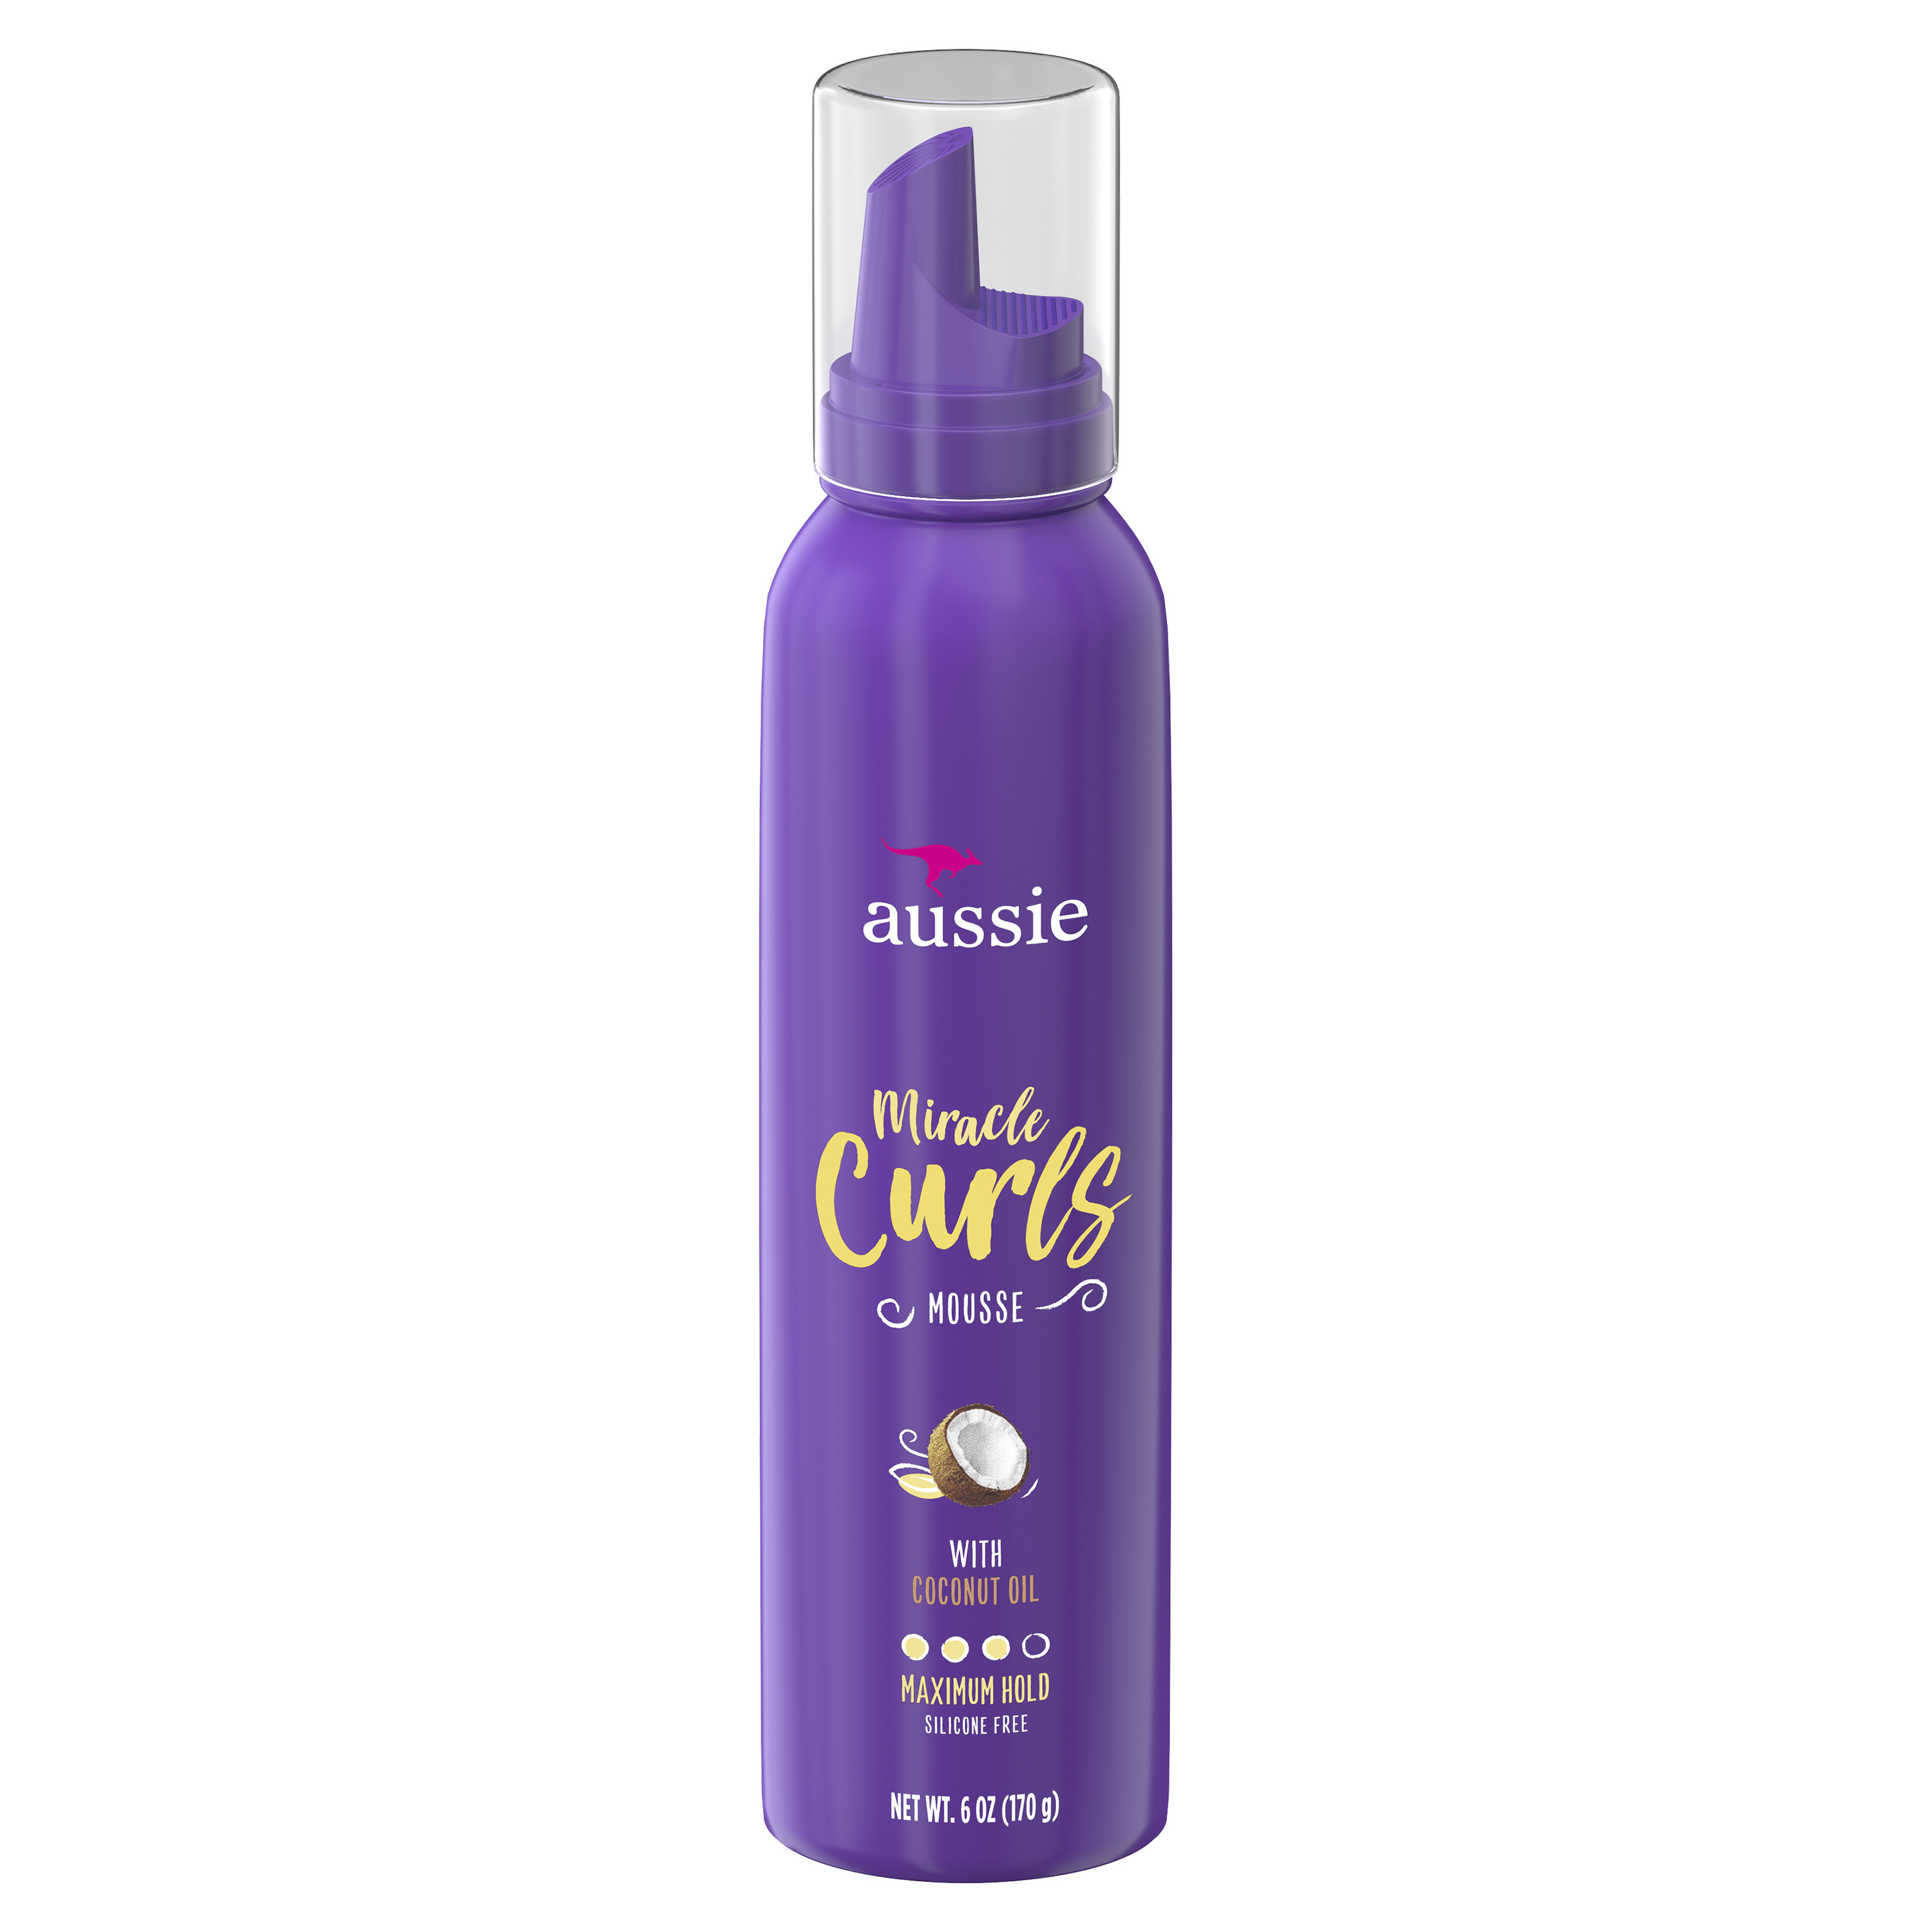 Aussie Miracle Curls Styling Mousse with Coconut & Jojoba Oil, for Curly Hair, Unisex 6.0 fl oz - image 1 of 10